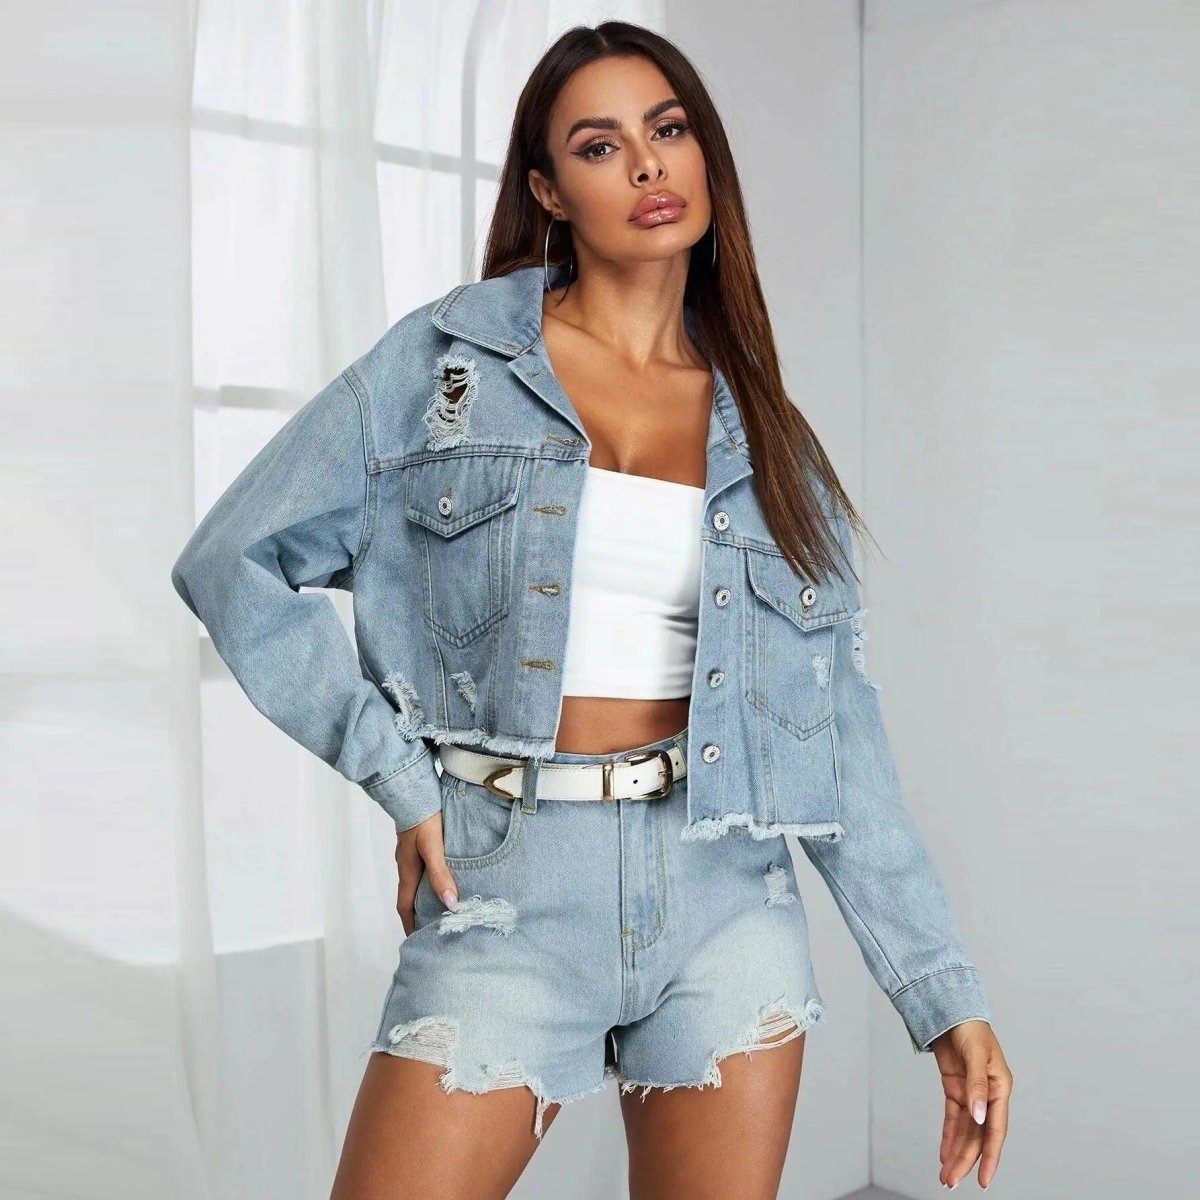 Blusa Jeans Loma - LUV Mulher - IV031 - Blusa Jeans Loma - Jeans - P -